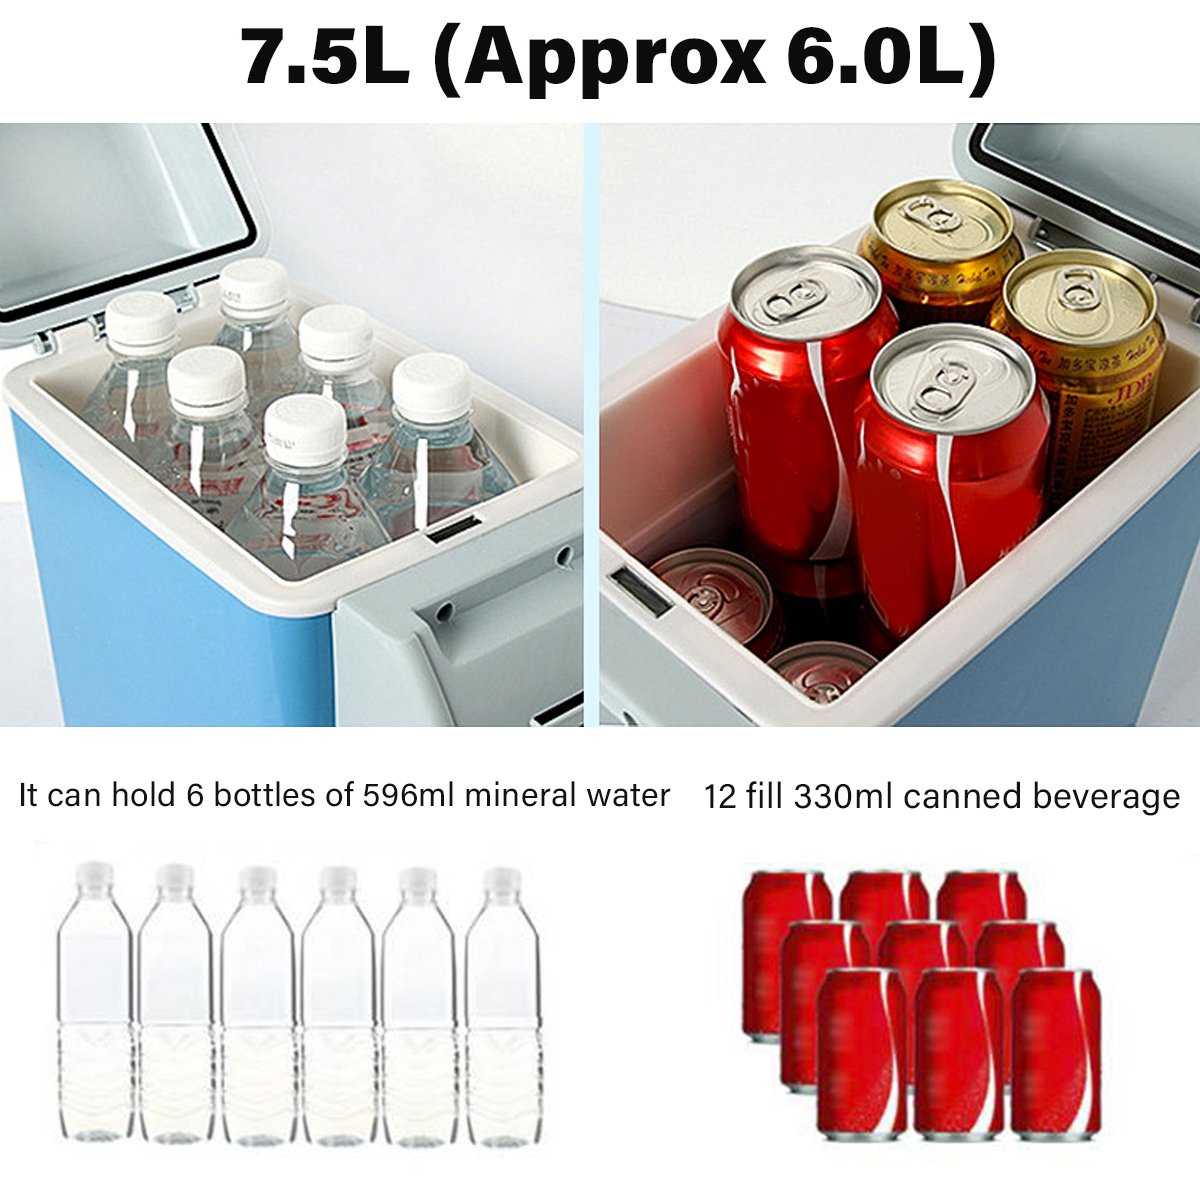 12V-75L-Portable-Vehicle-Refrigerator-Dual-use-Heating--Cooling-Freezer-For-Outdoor-Camping-Travelli-1748753-5